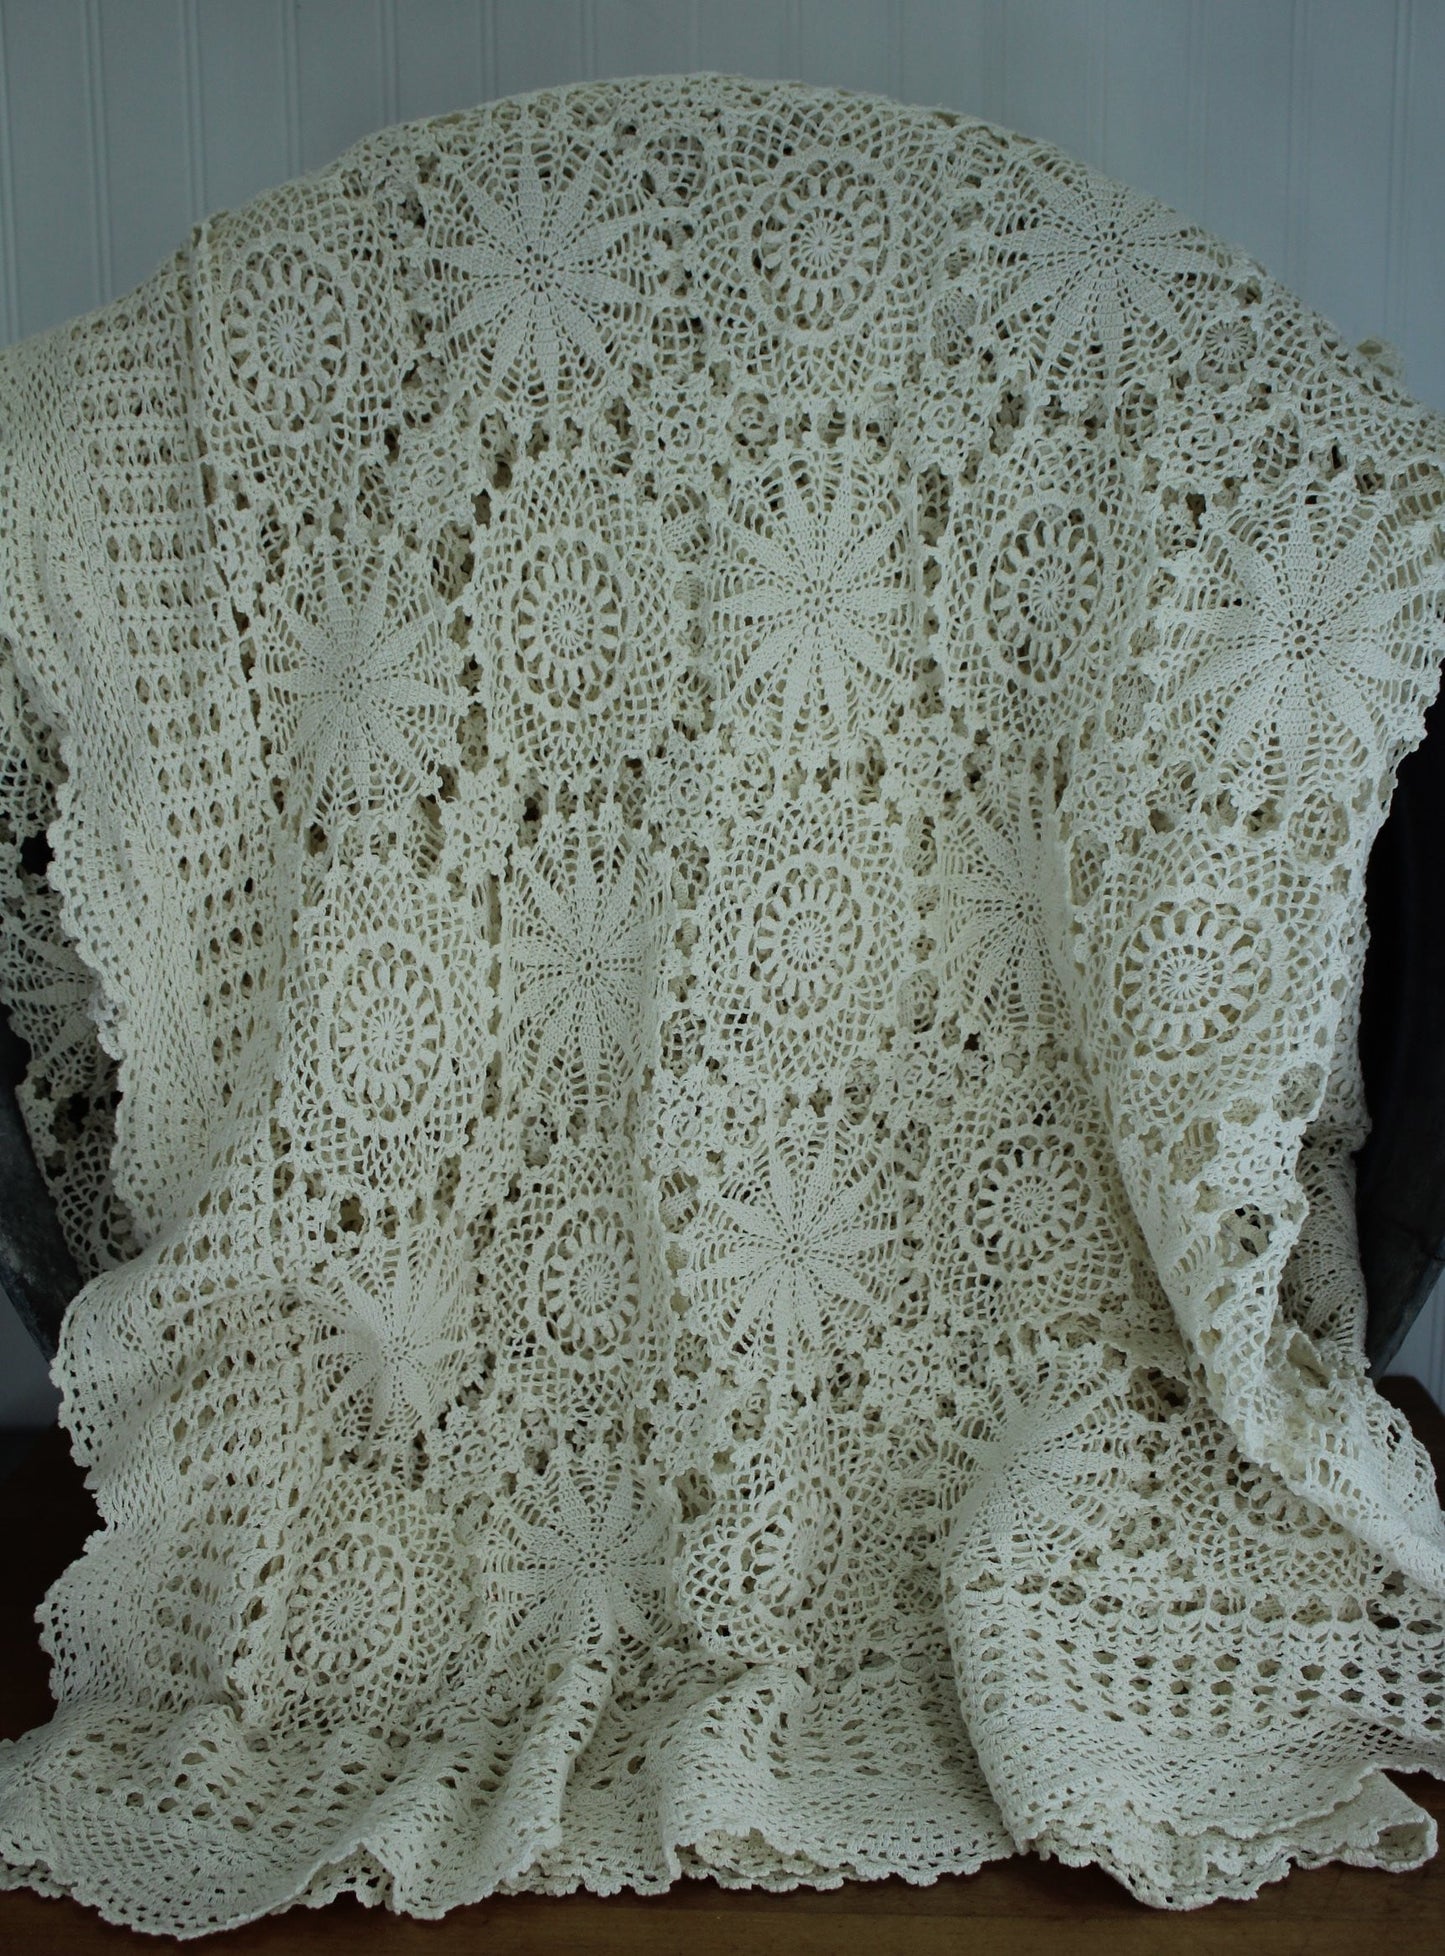 Cotton Lace Bed Coverlet or Tablecloth - Variety Crochet Medallions ~ 85" X 108" vintage